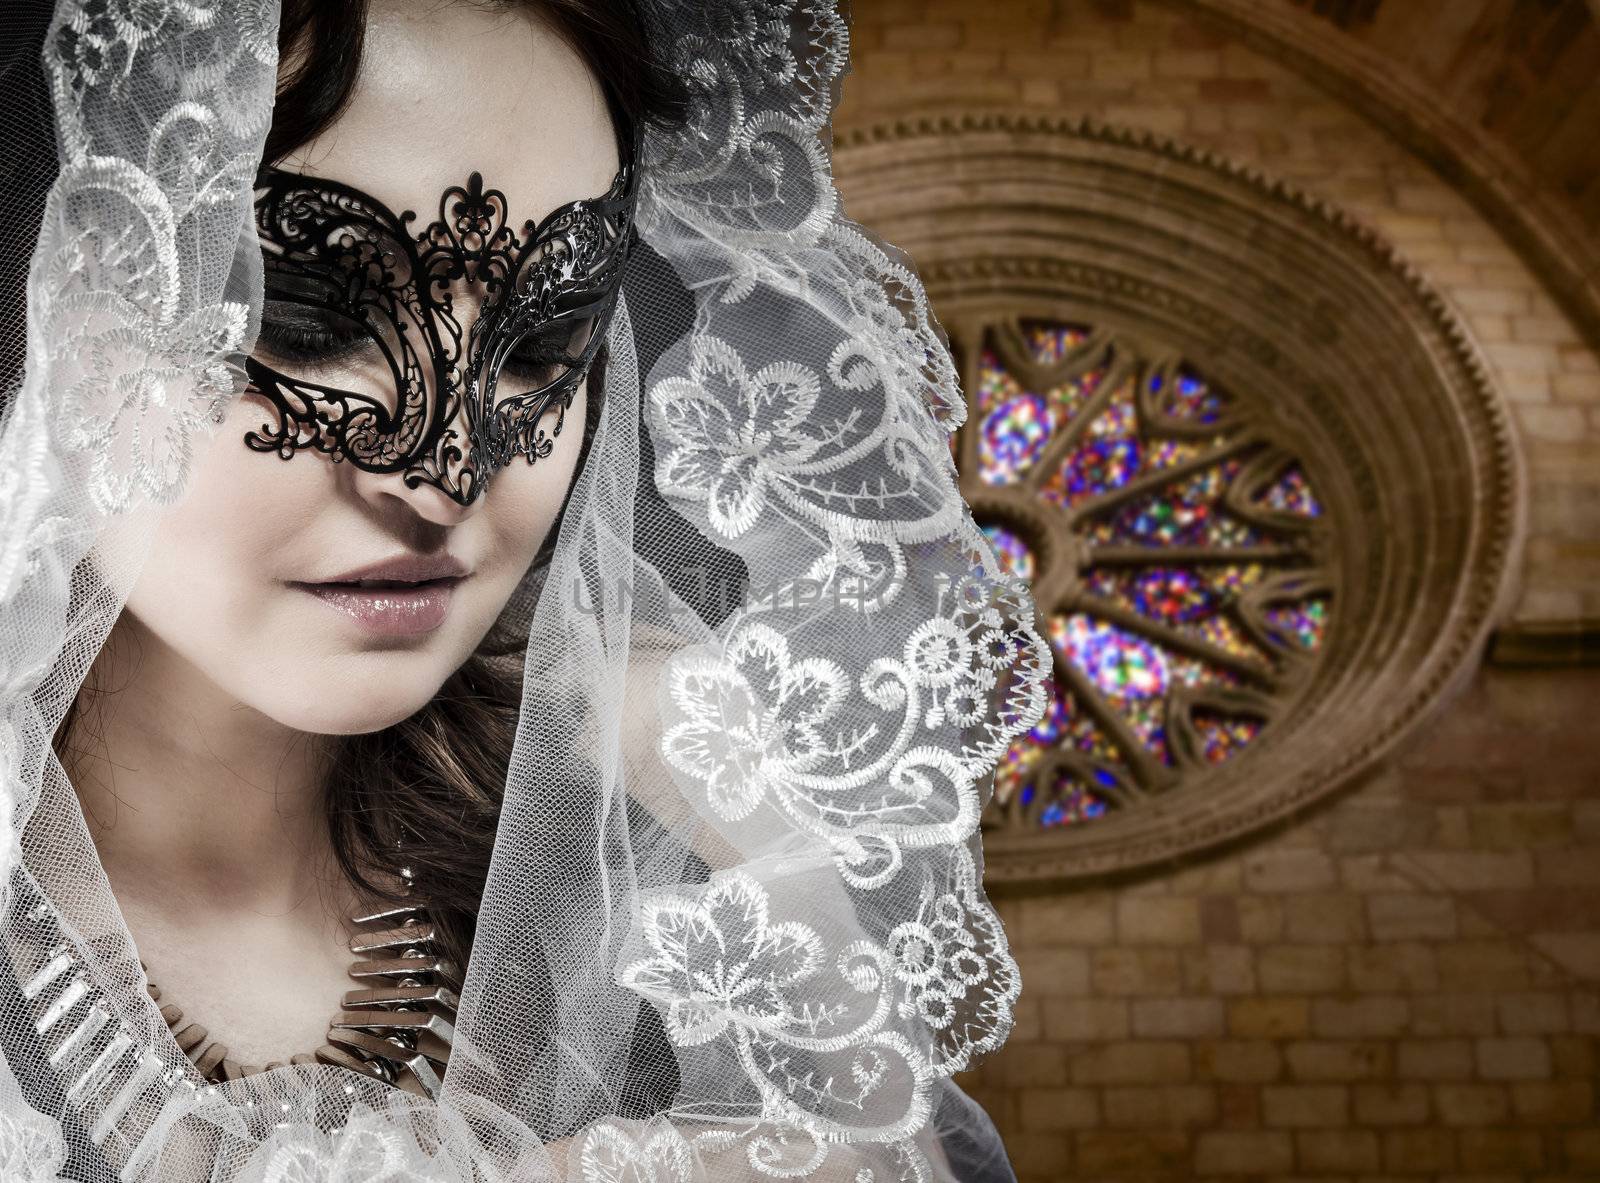 Virgin, Woman in veil and black dress with venetian mask in gothic cathedral